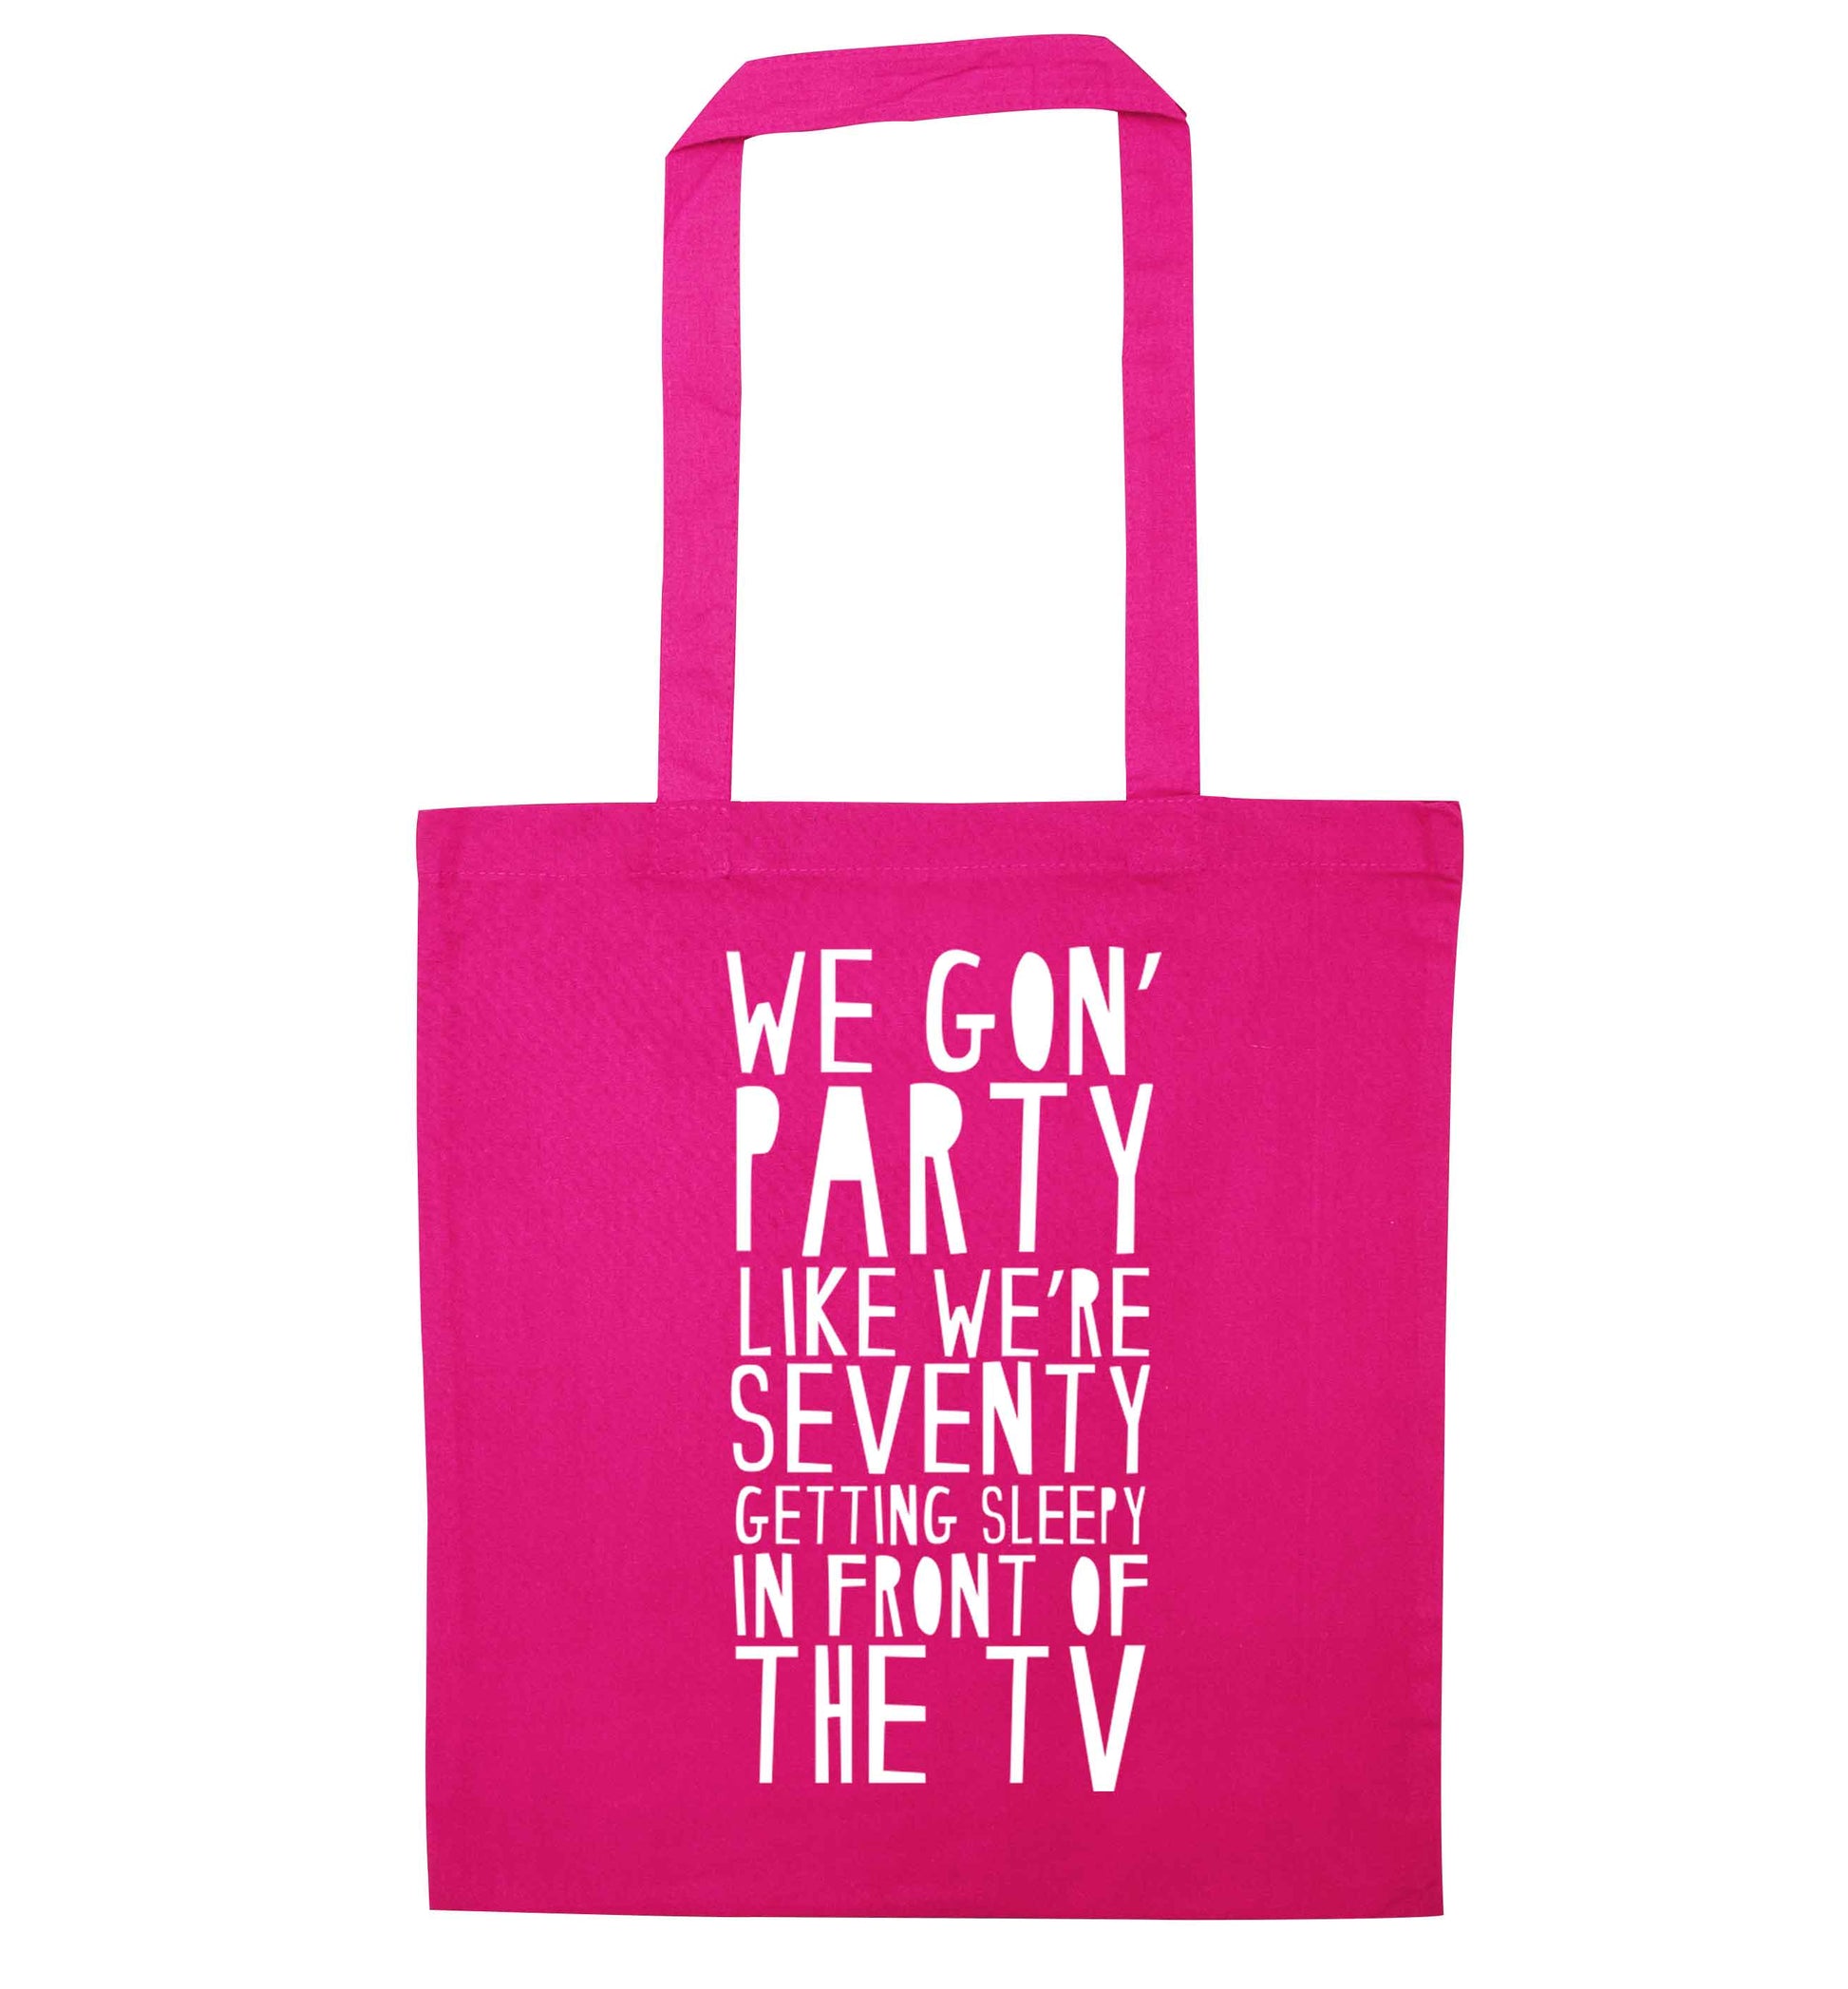 We gon' party like we're seventy getting sleepy in front of the TV pink tote bag